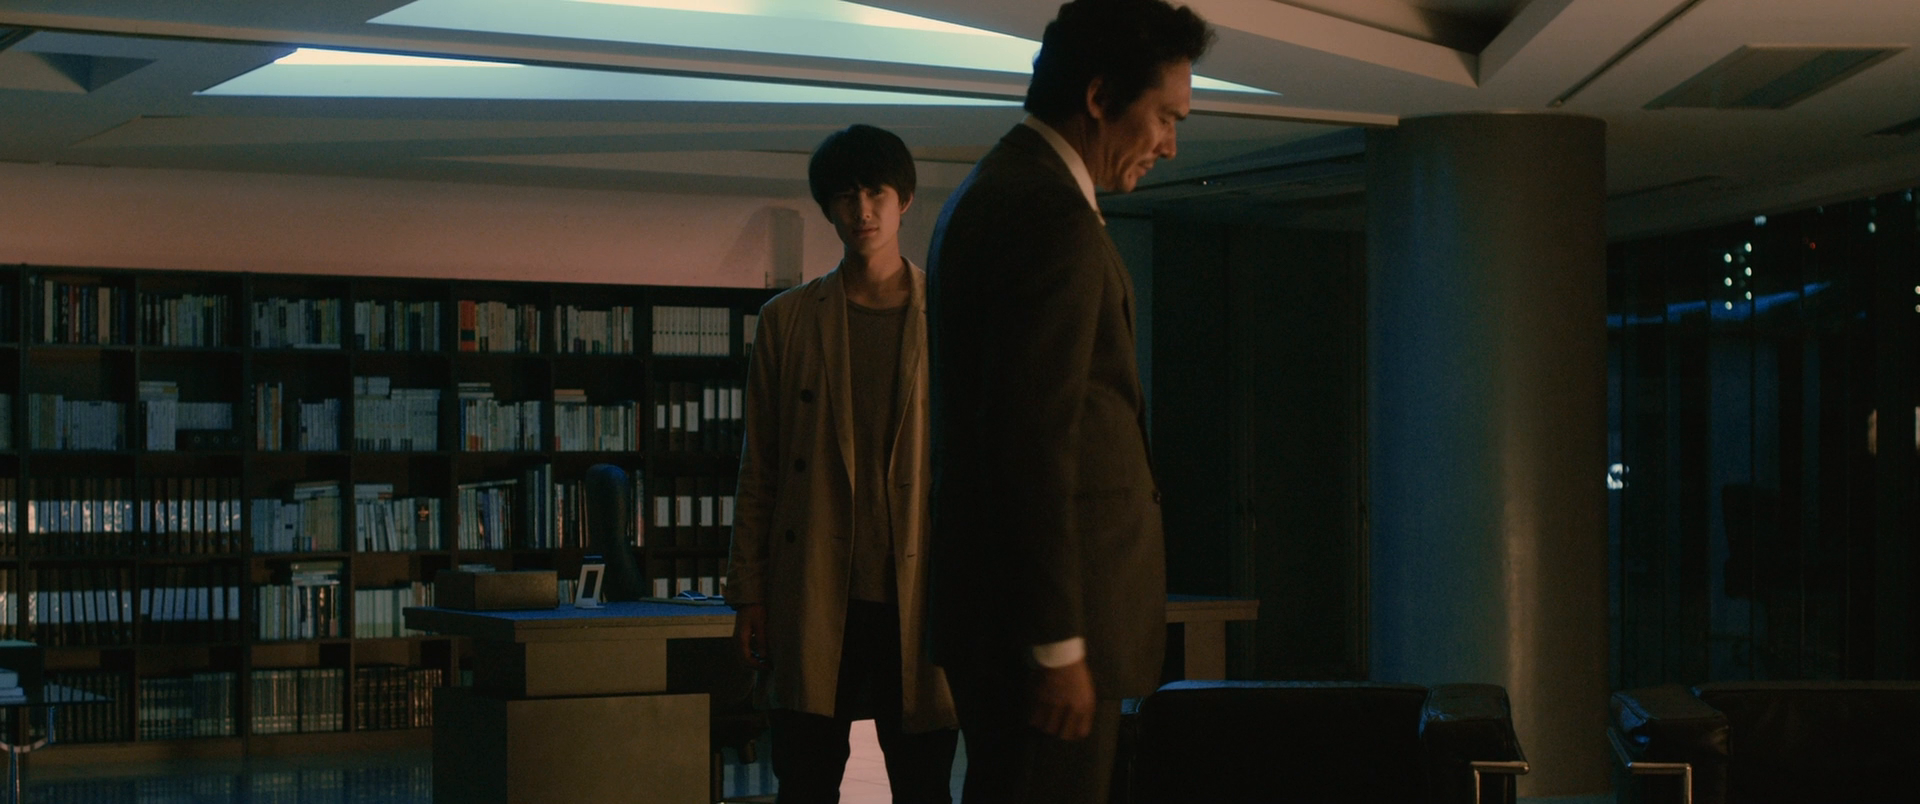  Strayers.Chronicle.2015.JAPANESE.1080p.BluRay.x264.DTS-WiKi 13.77GB-3.png